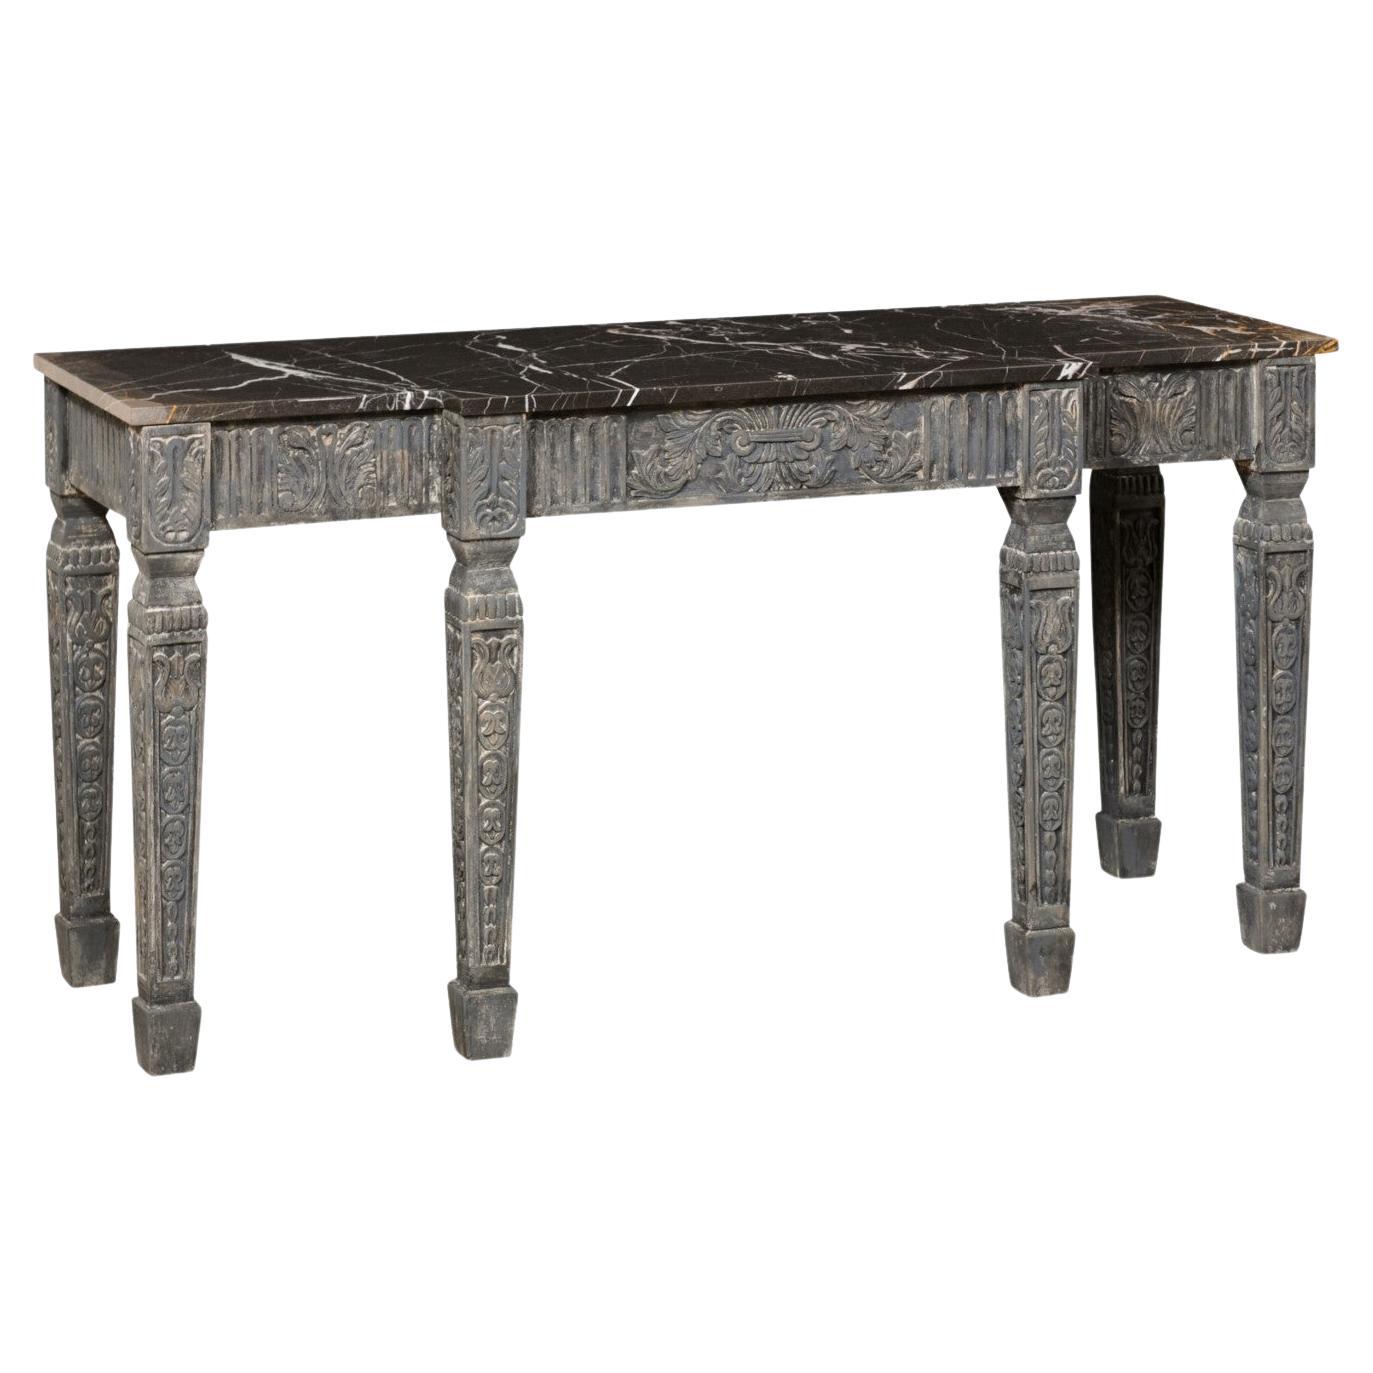 French Ornately-Carved Console Table W/Marble Top & Shallow Breakfront Design